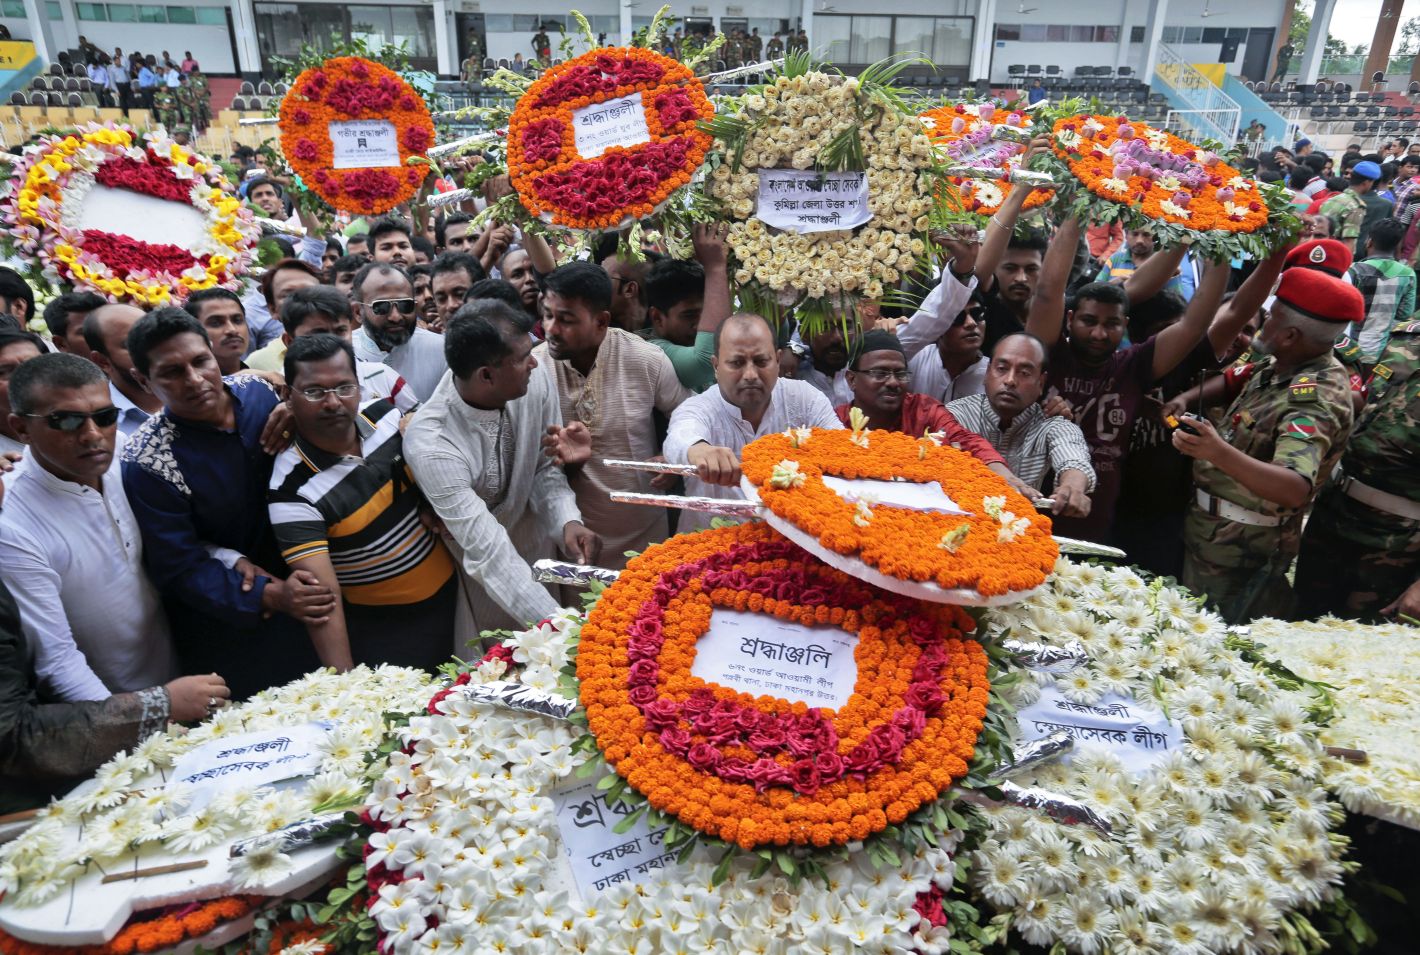 A tribute to the victims of the Dhaka attack